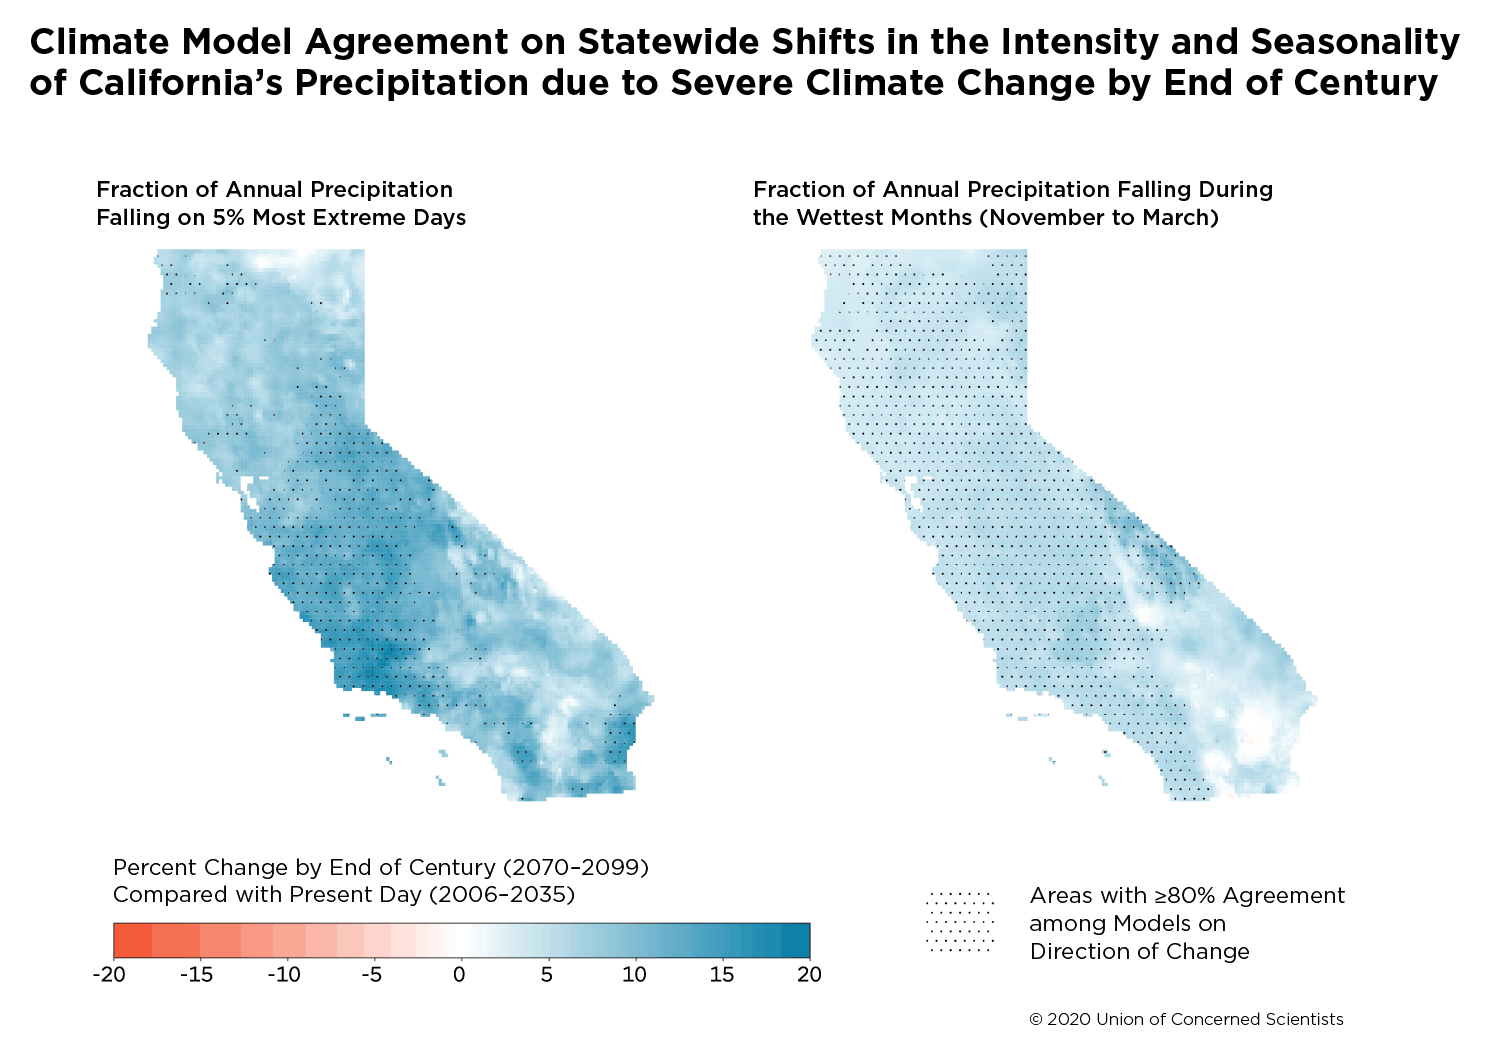 Climate model on shifts in intensity and seasonality of California’s precipitation due to severe climate change 